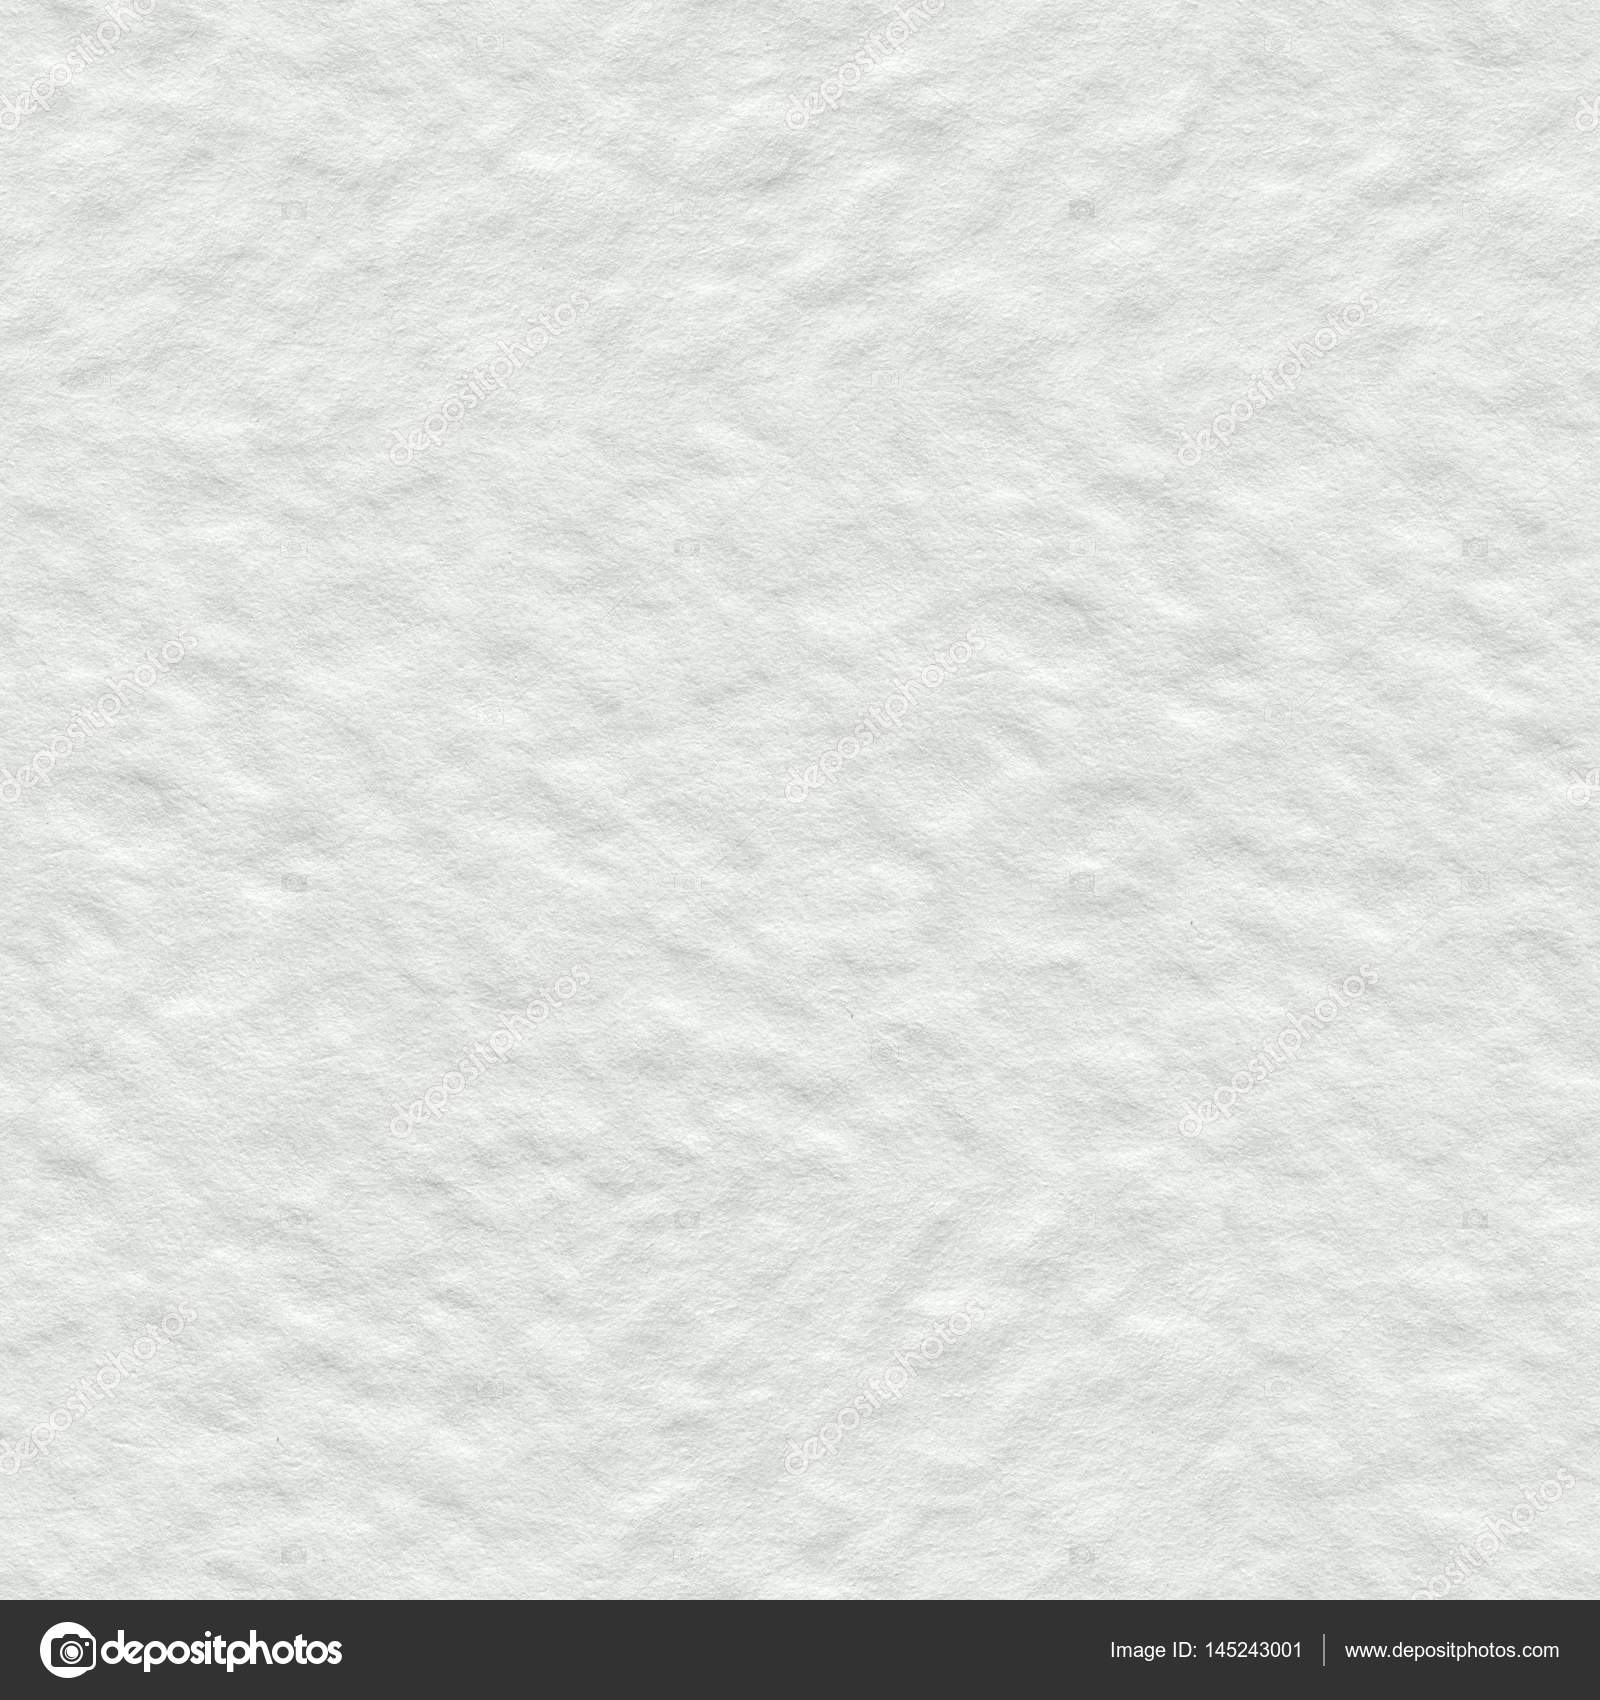 White watercolor paper texture. Seamless square background, tile ...